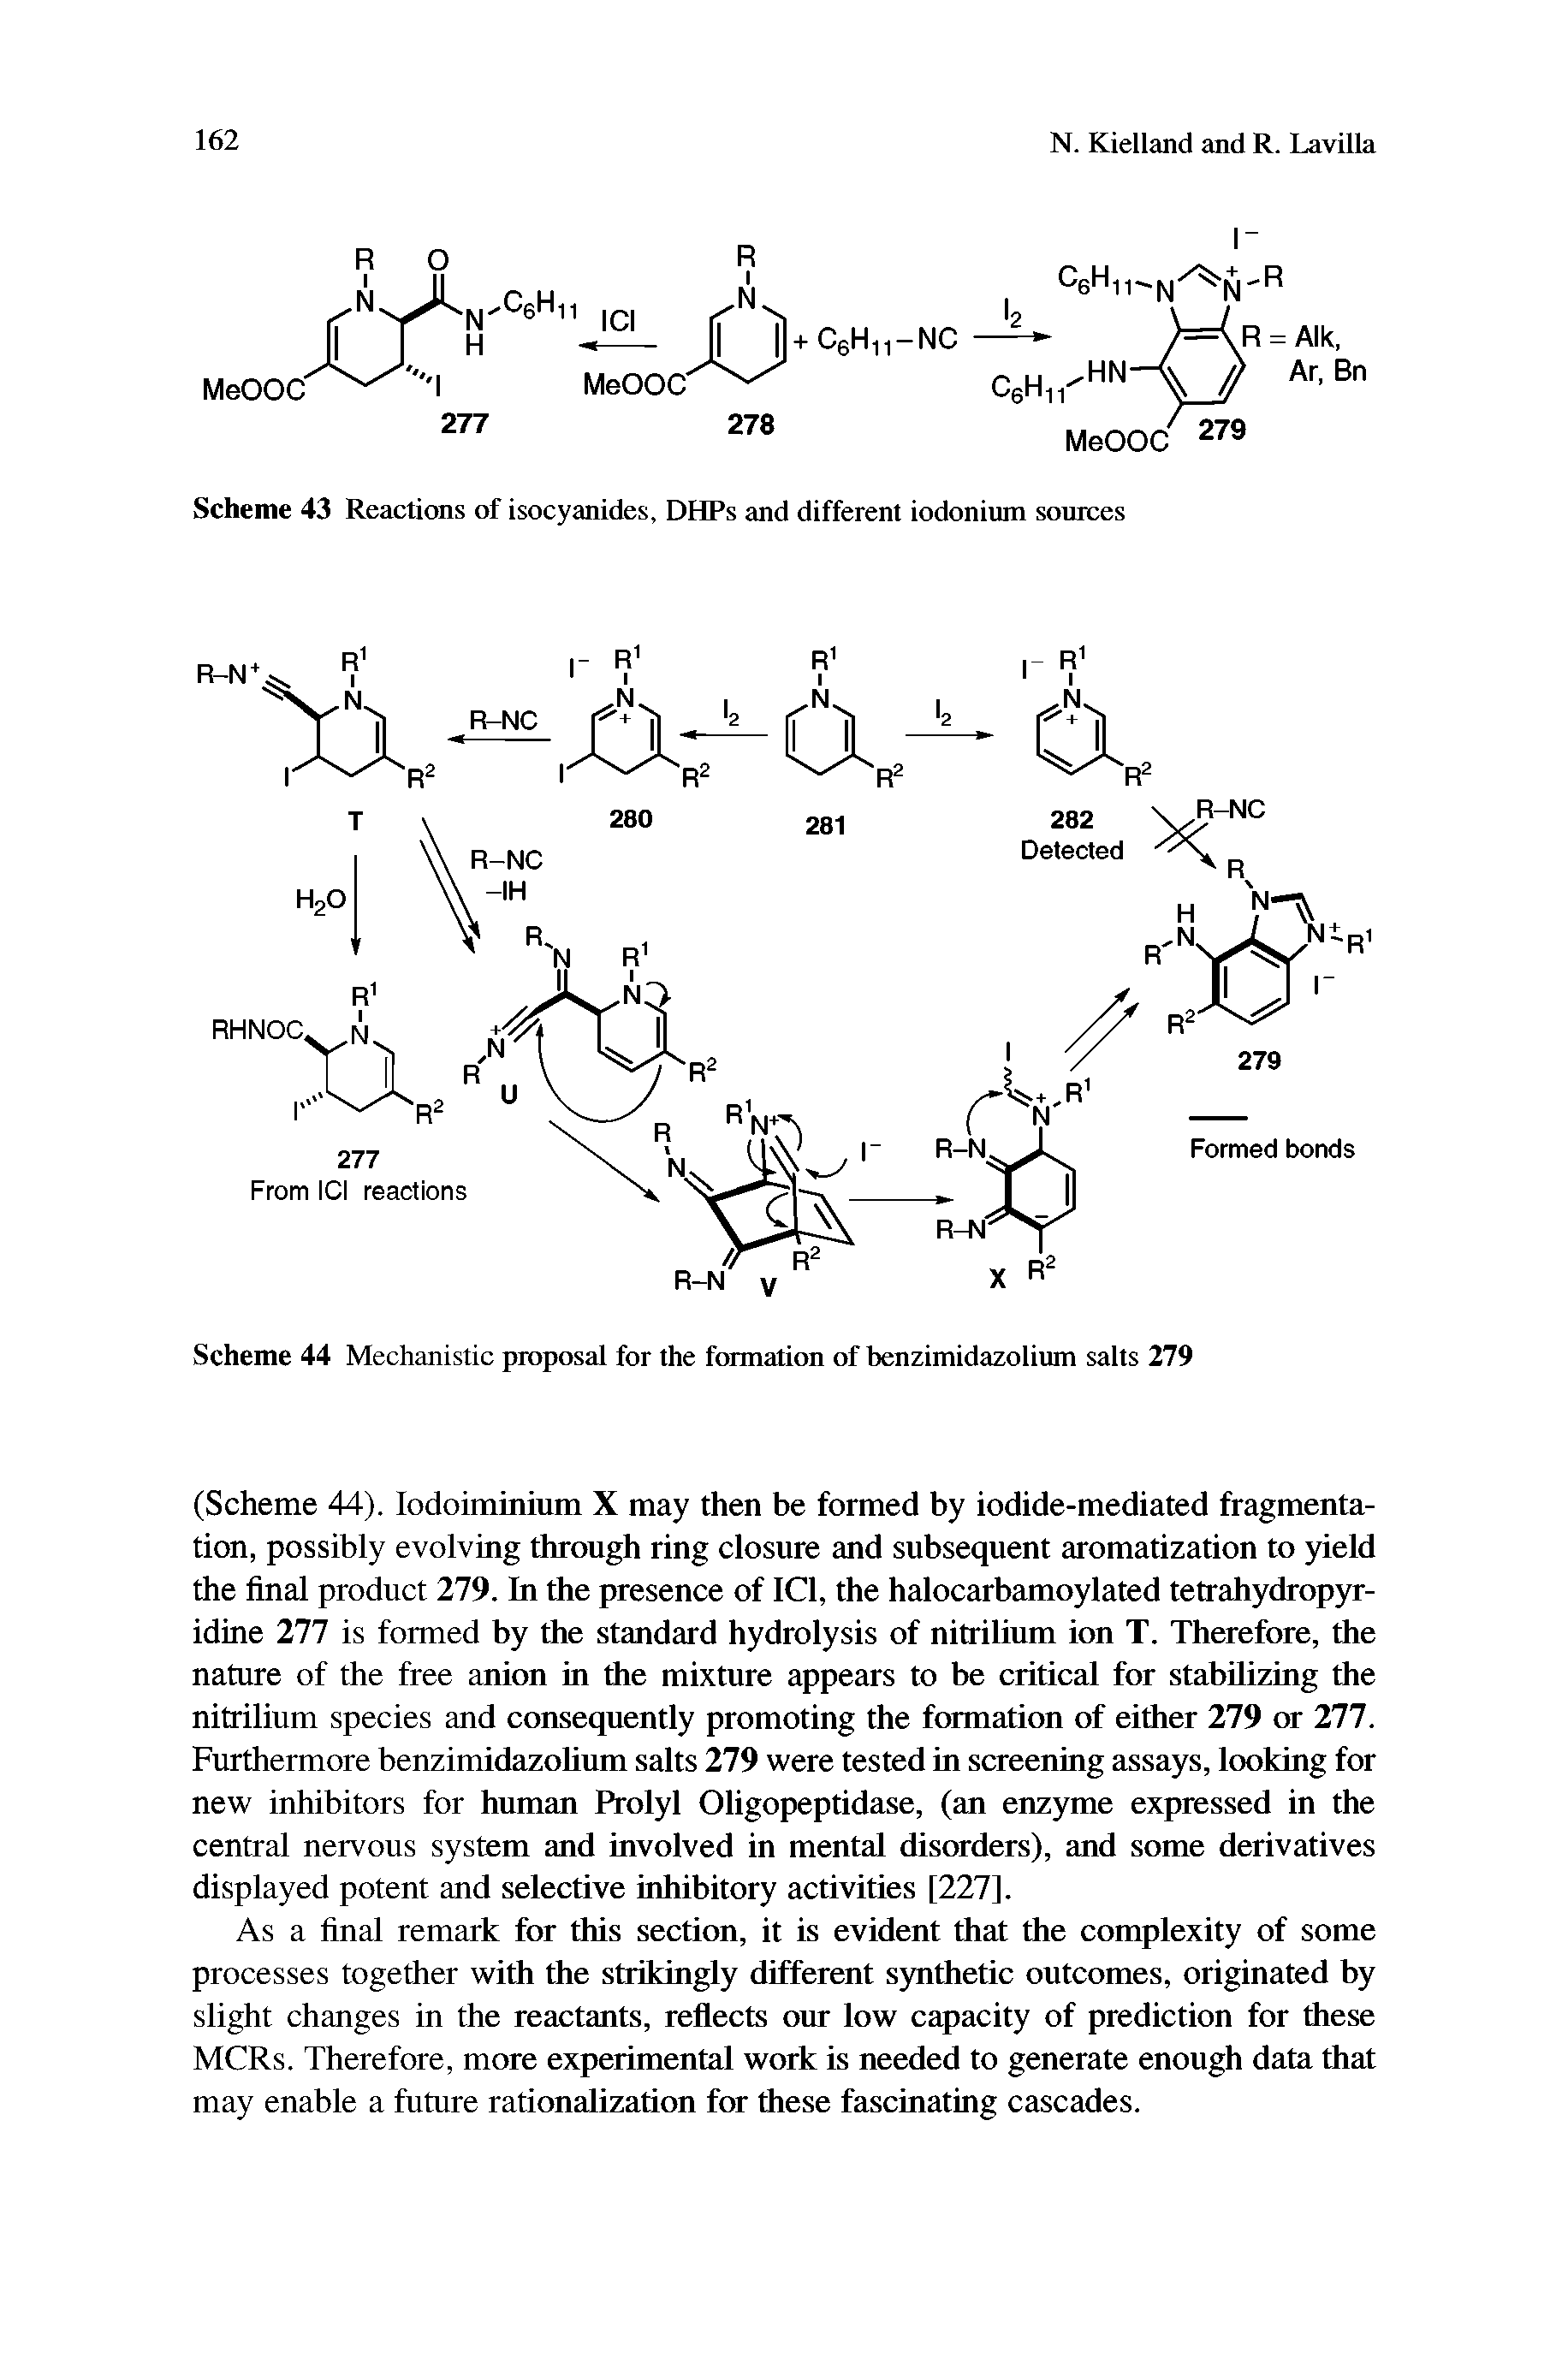 Scheme 43 Reactions of isocyanides, DHPs and different iodonium sources...